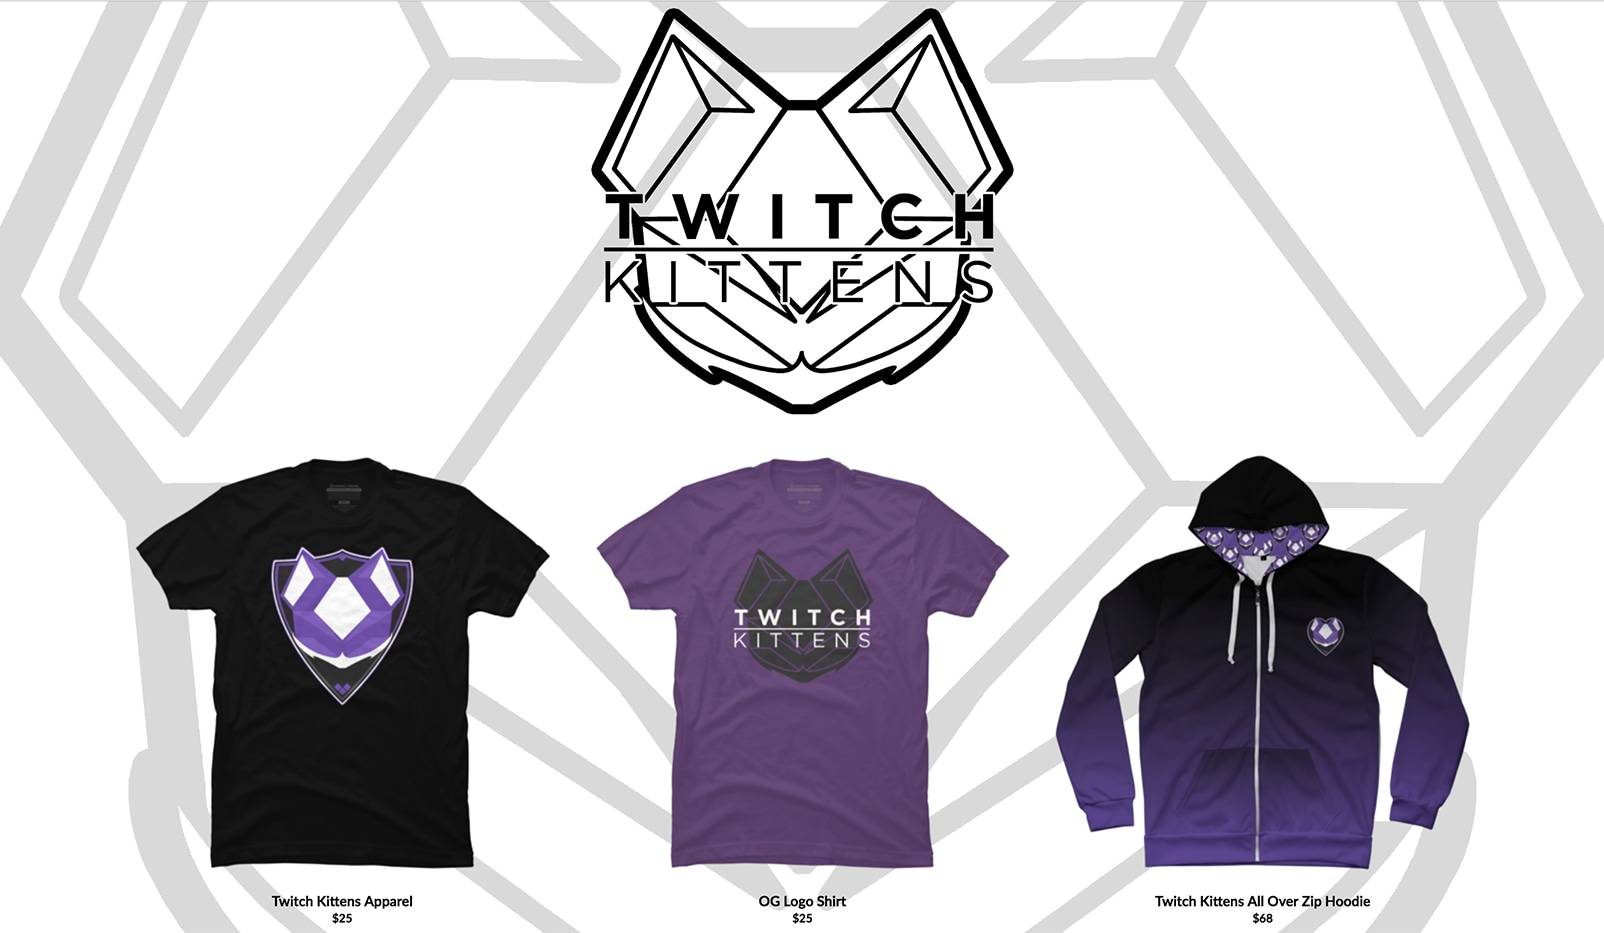 T-shirts on sale from Twitch Kittens' merch store